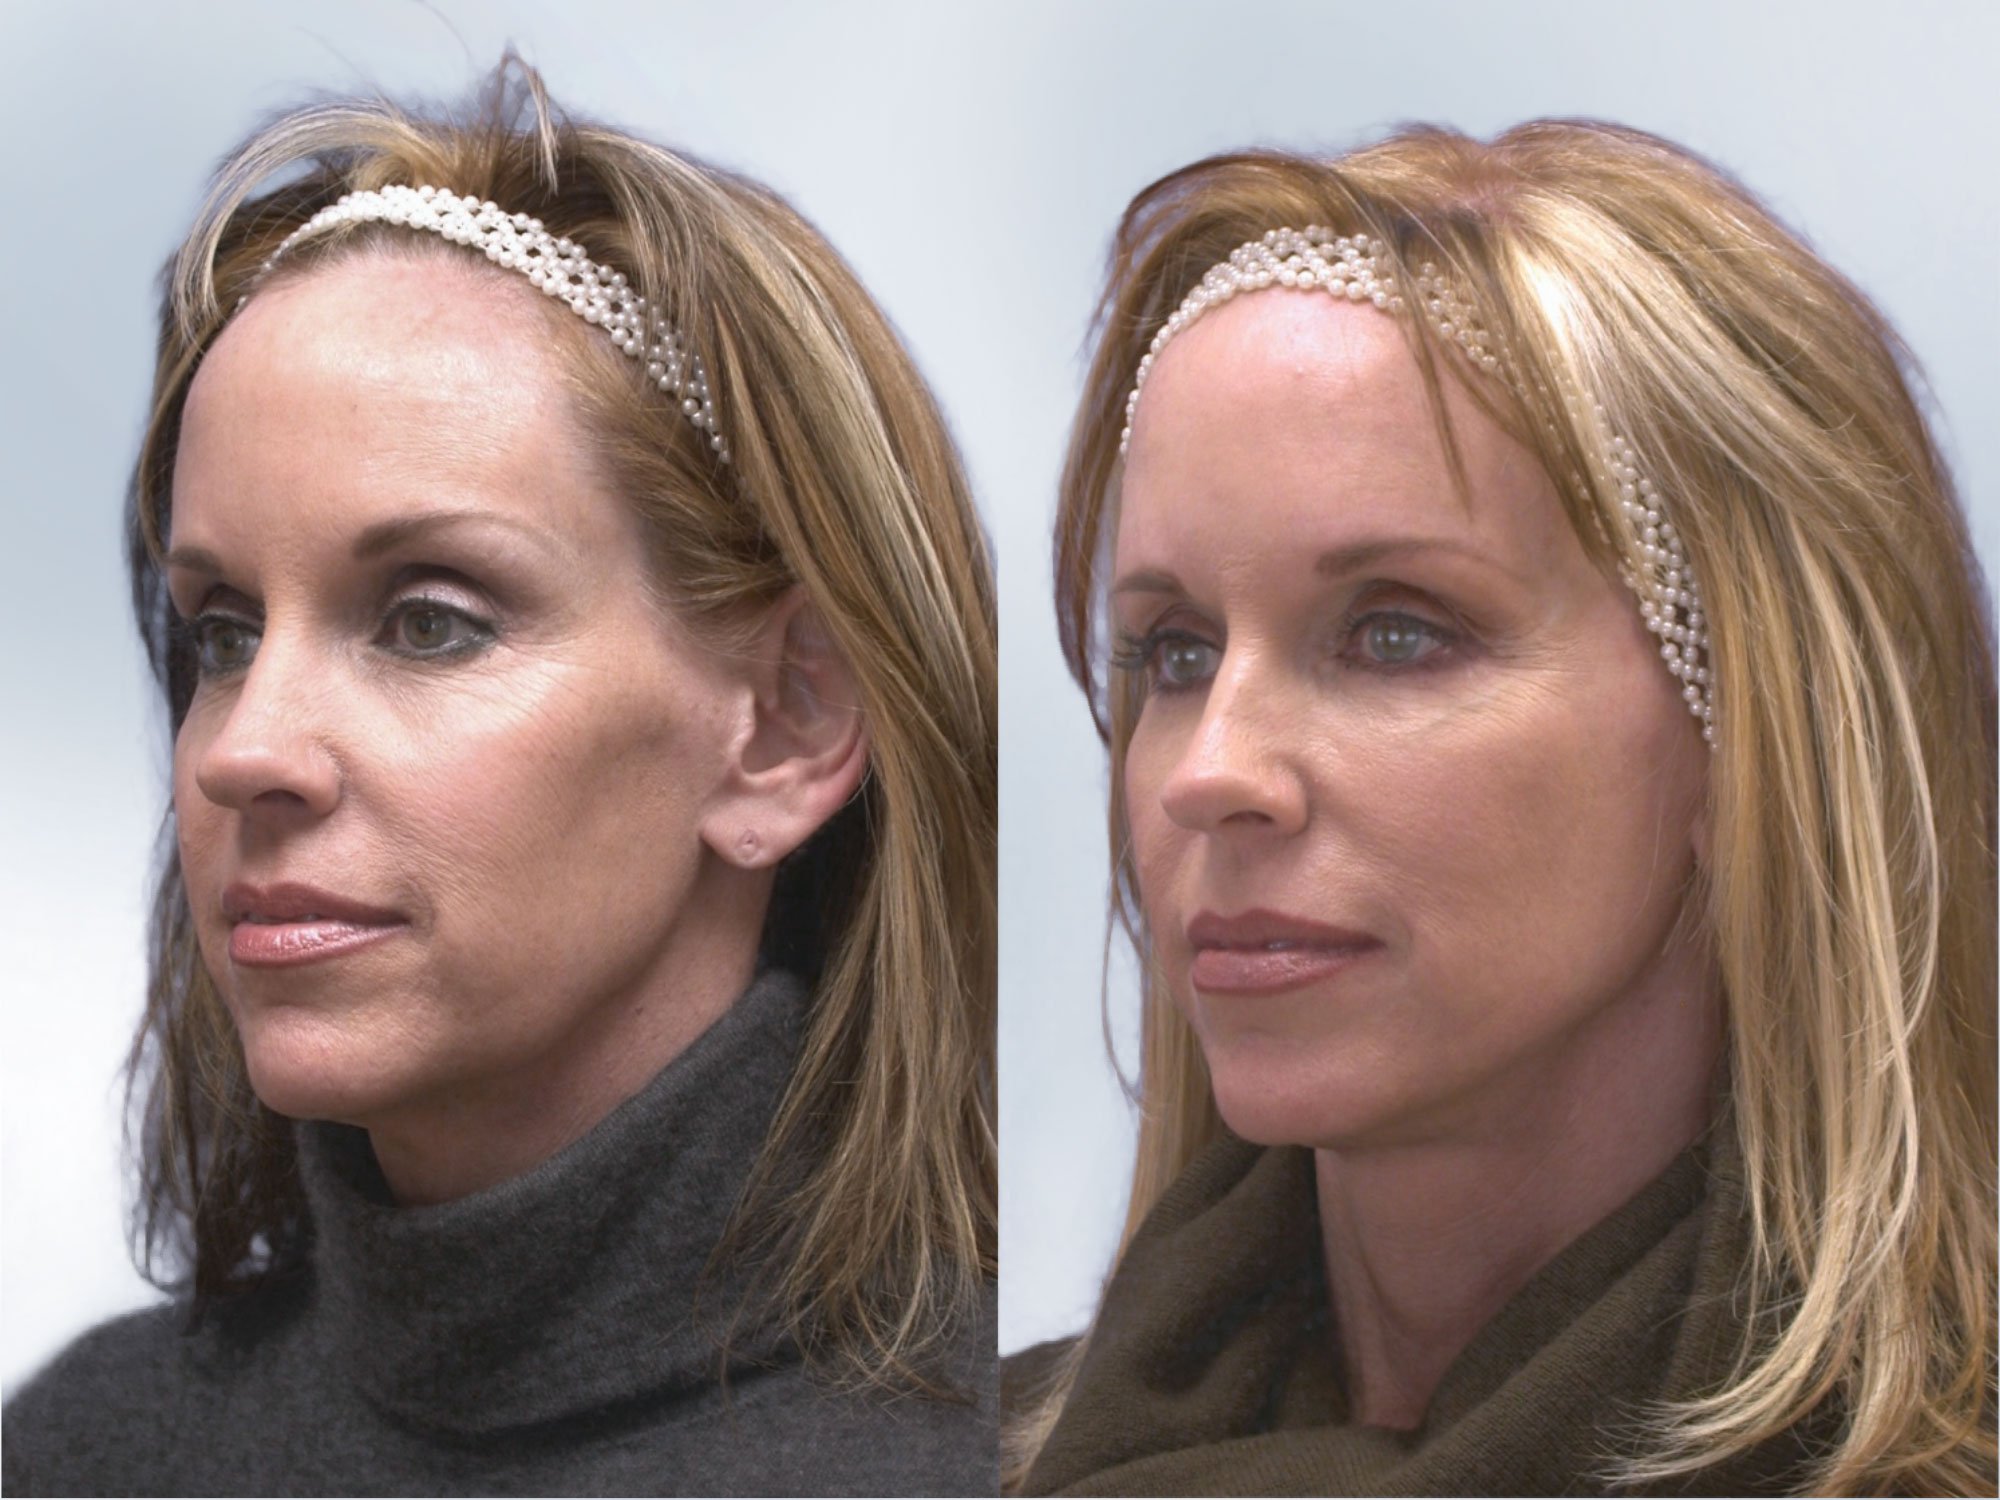 Before and After Sculptra treatment images of a woman's face at a 45 degree angle facing left showing marked improvement in cheek hollowness and facial volume after treatment